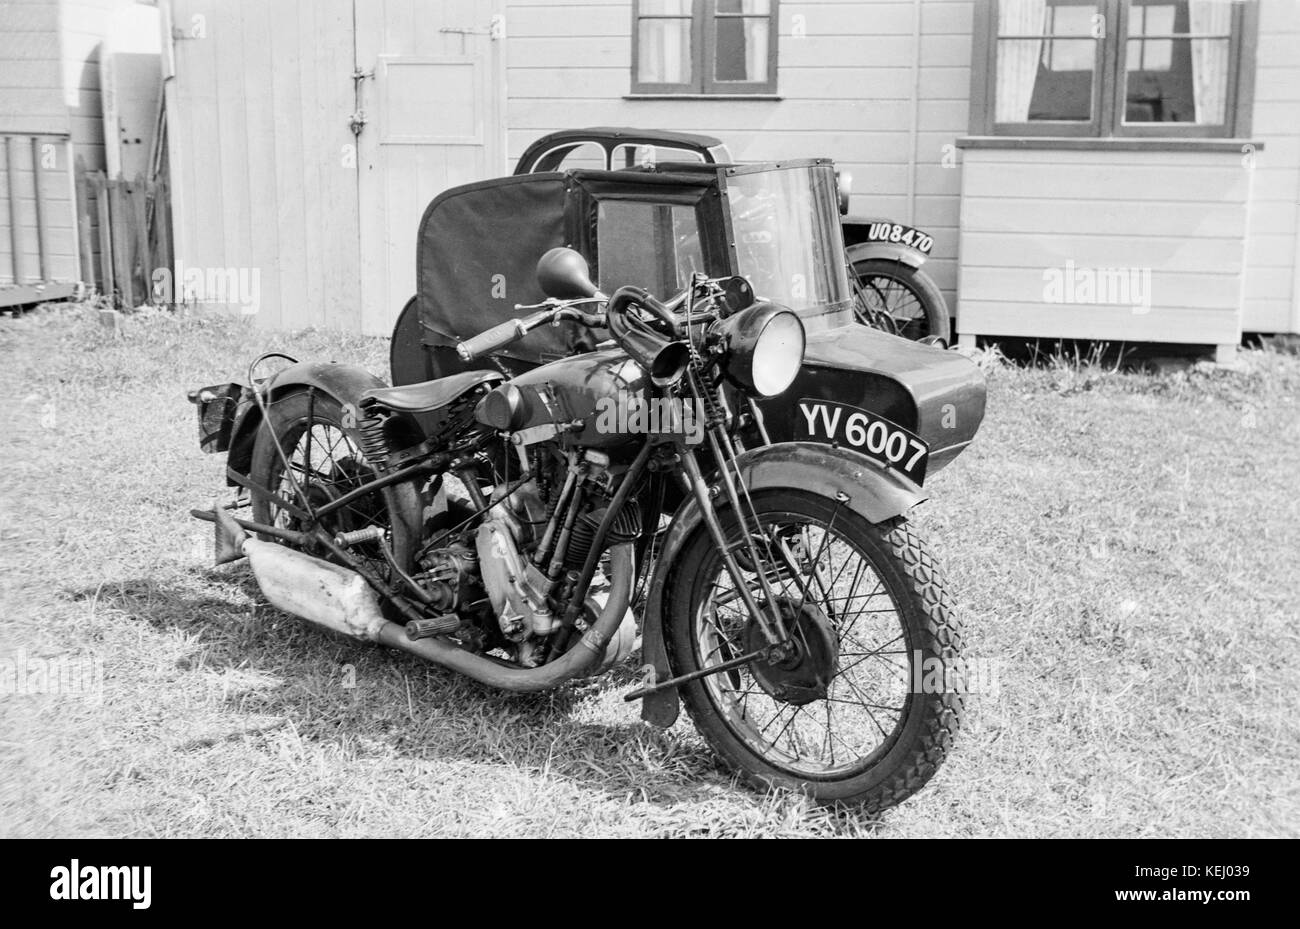 Vintage British BSA Sloper Motorcycle with sidecar.The BSA S-Series of motorcycles, most commonly known as the BSA Sloper, were a series of motorcycles produced by the Birmingham Small Arms Company (BSA) from 1927-1935.  Launched in 1927, the 493cc overhead valve engine was slanted, and the motorcycle featured a saddle tank that enabled a low seating position, improving the centre of gravity and handling. Designated as the new S-series, whether this stood for sloper, speed or silence is unknown, but sloper became the term used by motorcyclists and hence adopted by BSA for marketing. Stock Photo